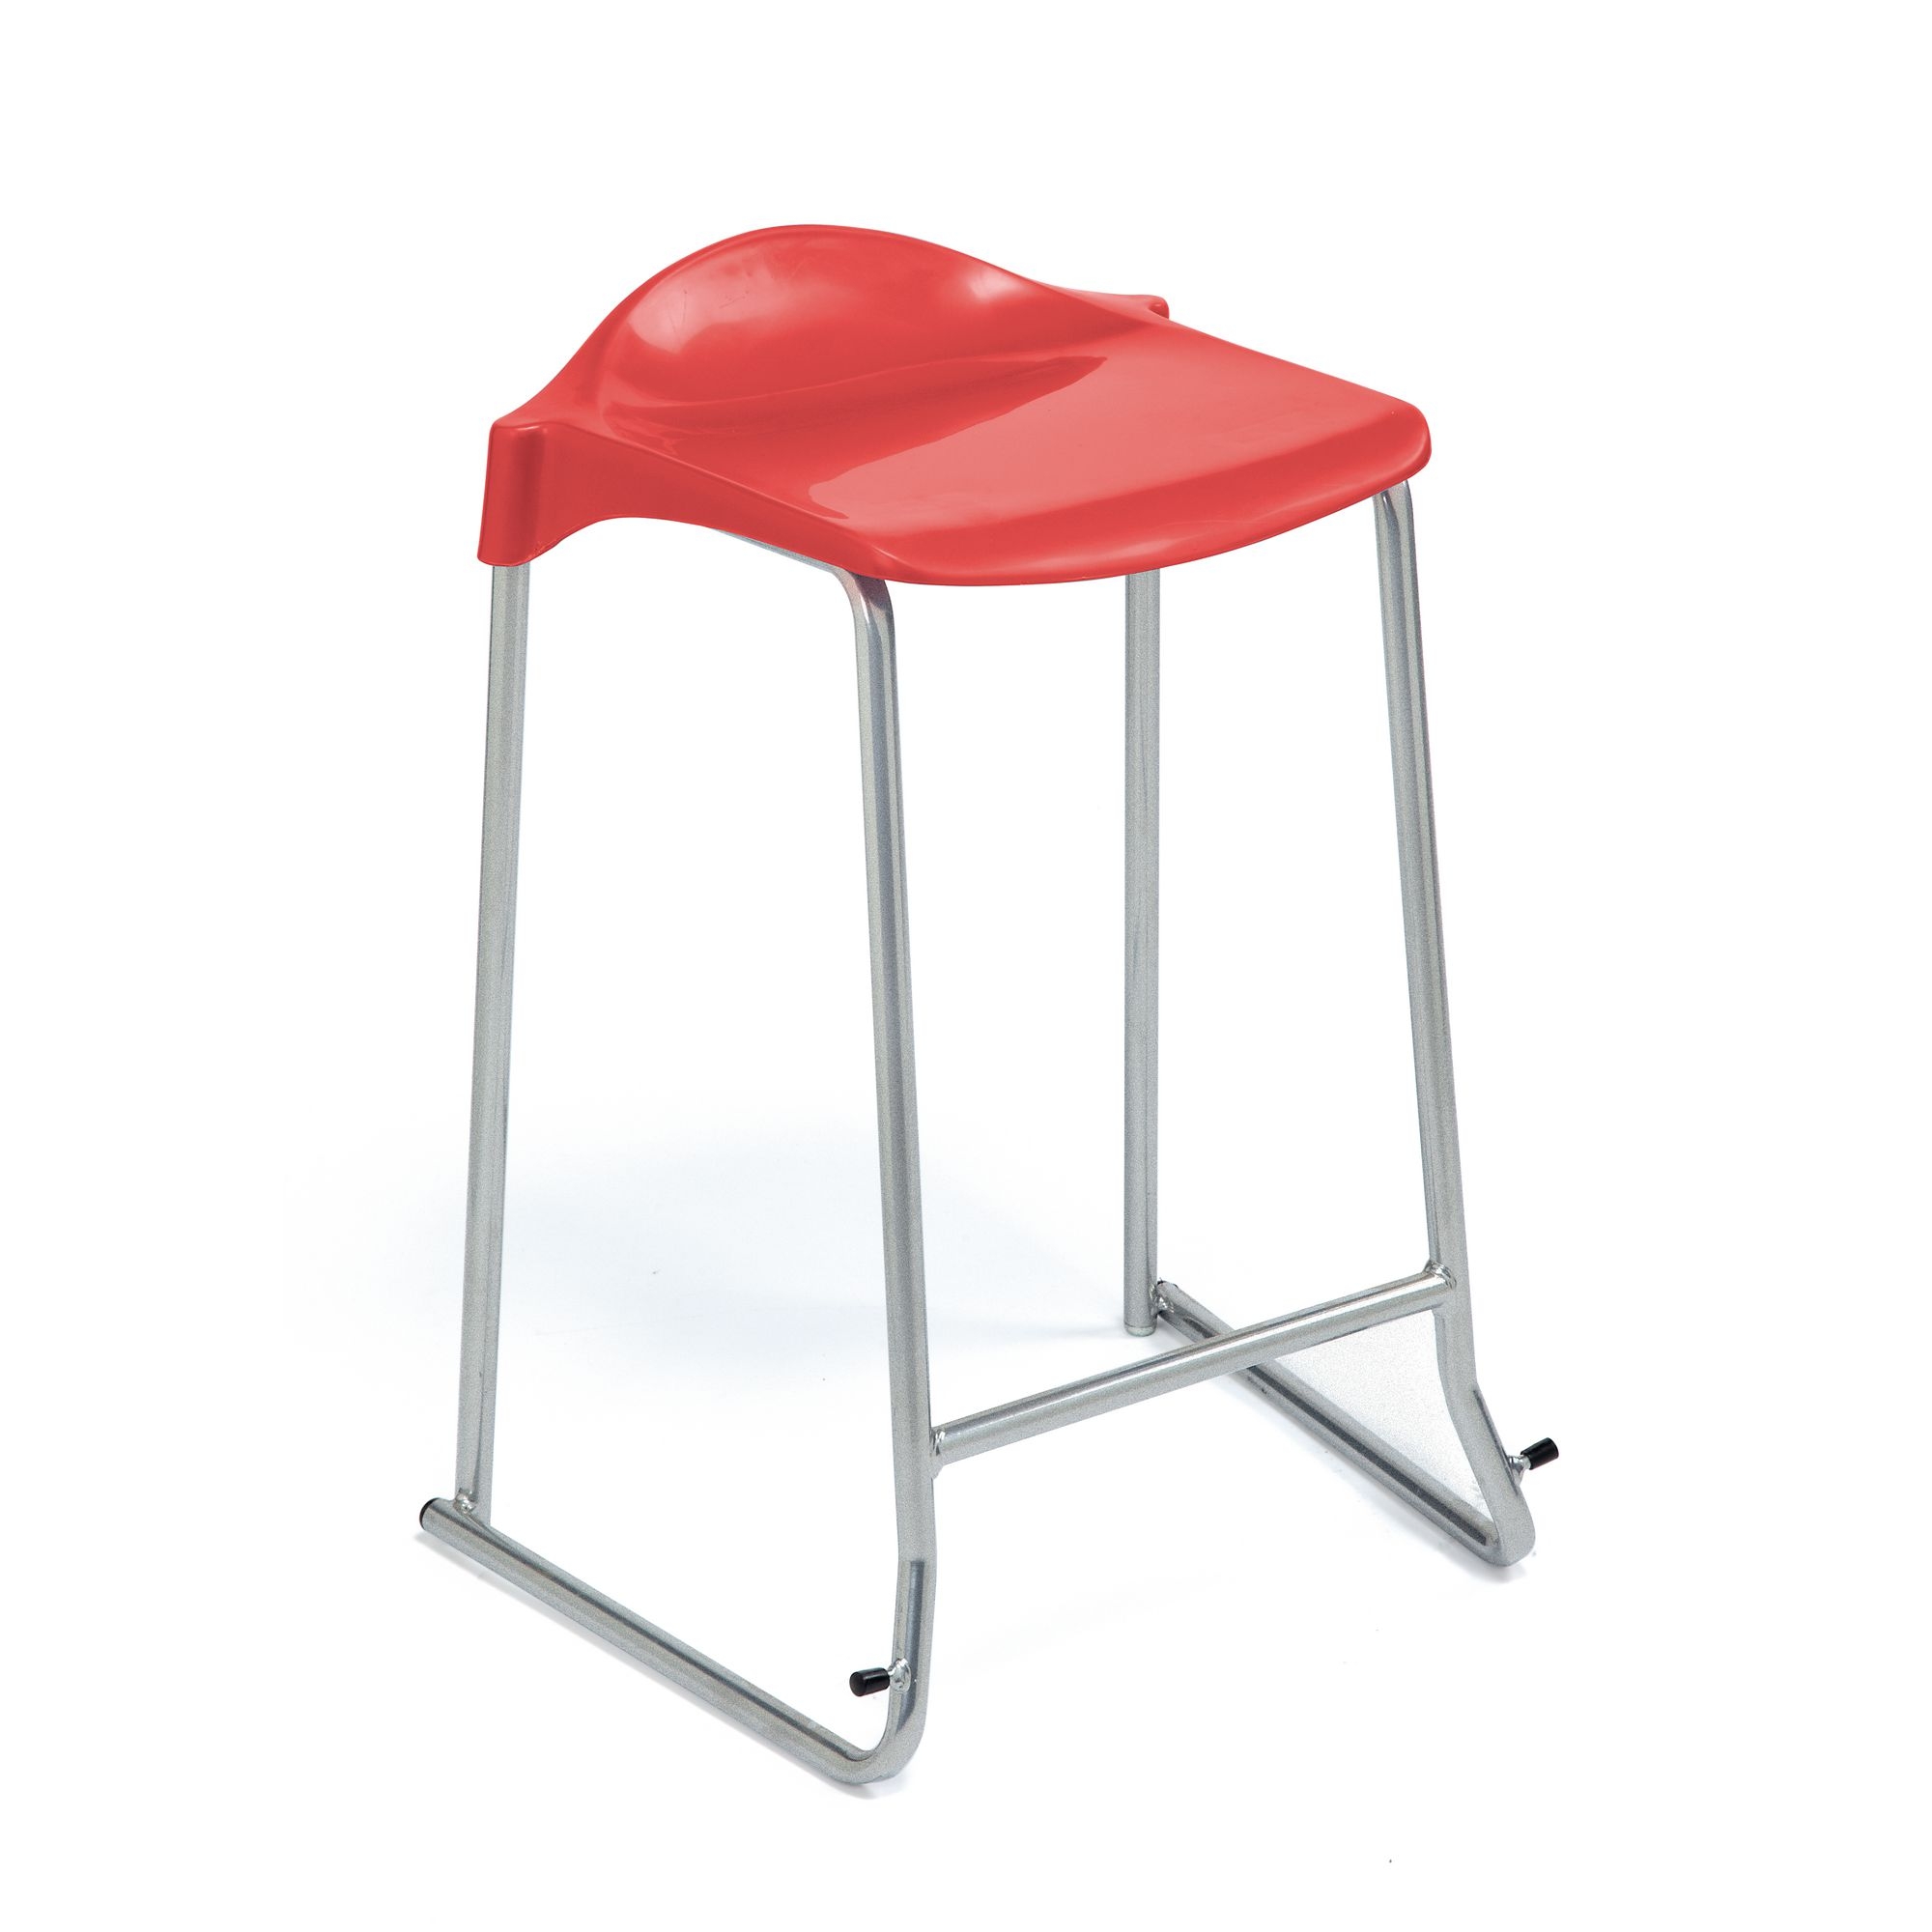 WSM Skid Base Stool - Seat height: 610mm - Charcoal